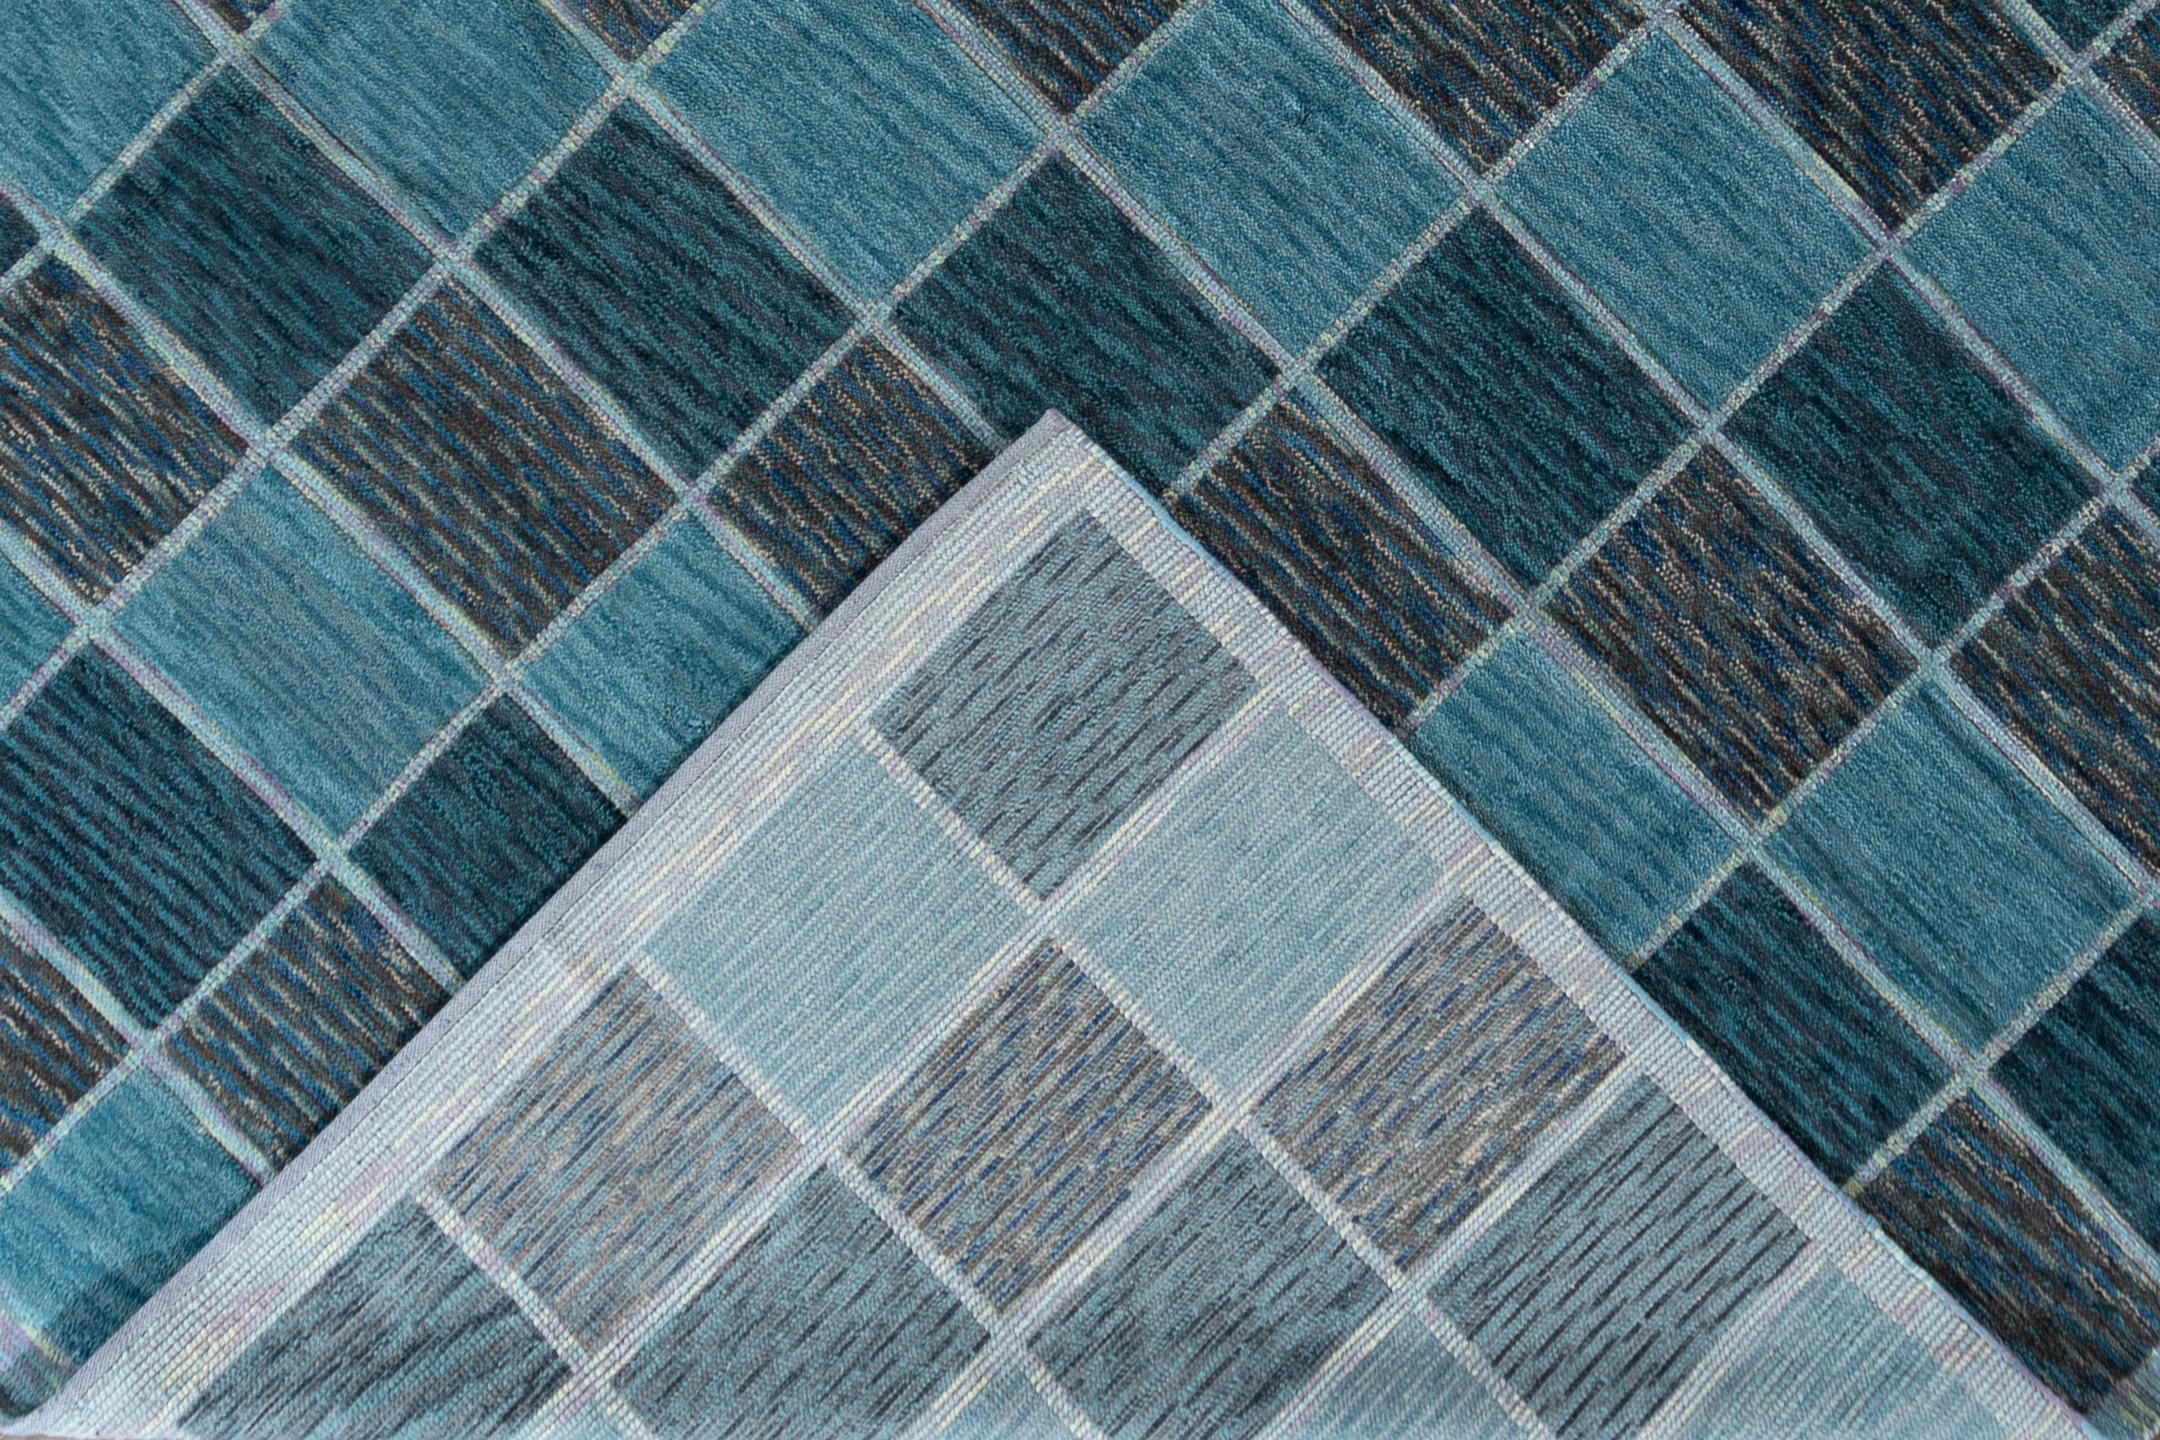 A 21st century contemporary flat-weave/pile rug with a blue geometric all-over design. Custom sizes are available.

Material: Wool
Lead time: Approximately 12 weeks
Available colors: As shown; other custom colors and styles available.
Made in